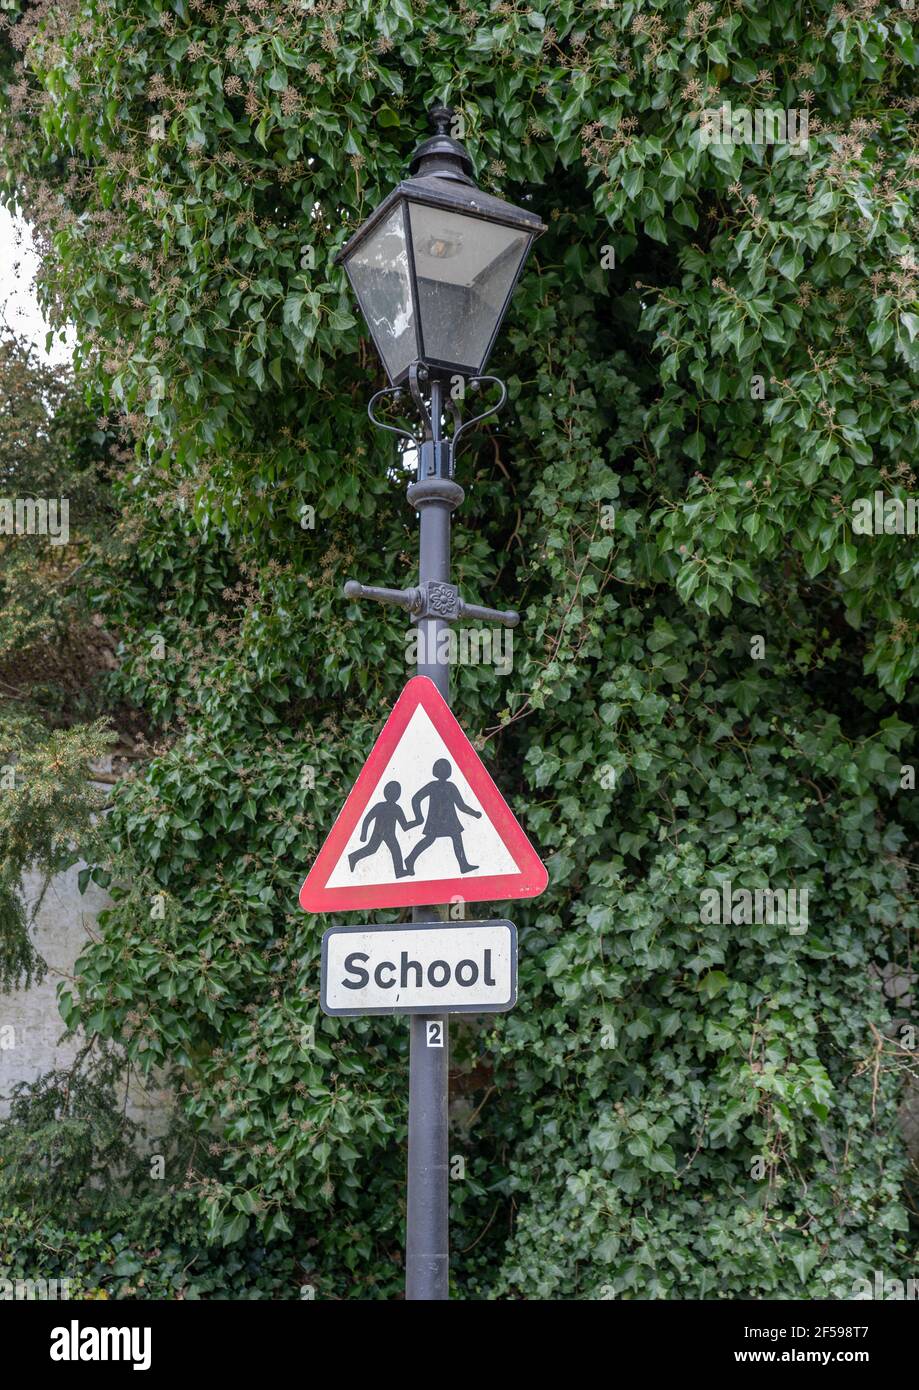 Red and white triangle school sign with children holding hands on an ornate street light lamppost. Stock Photo